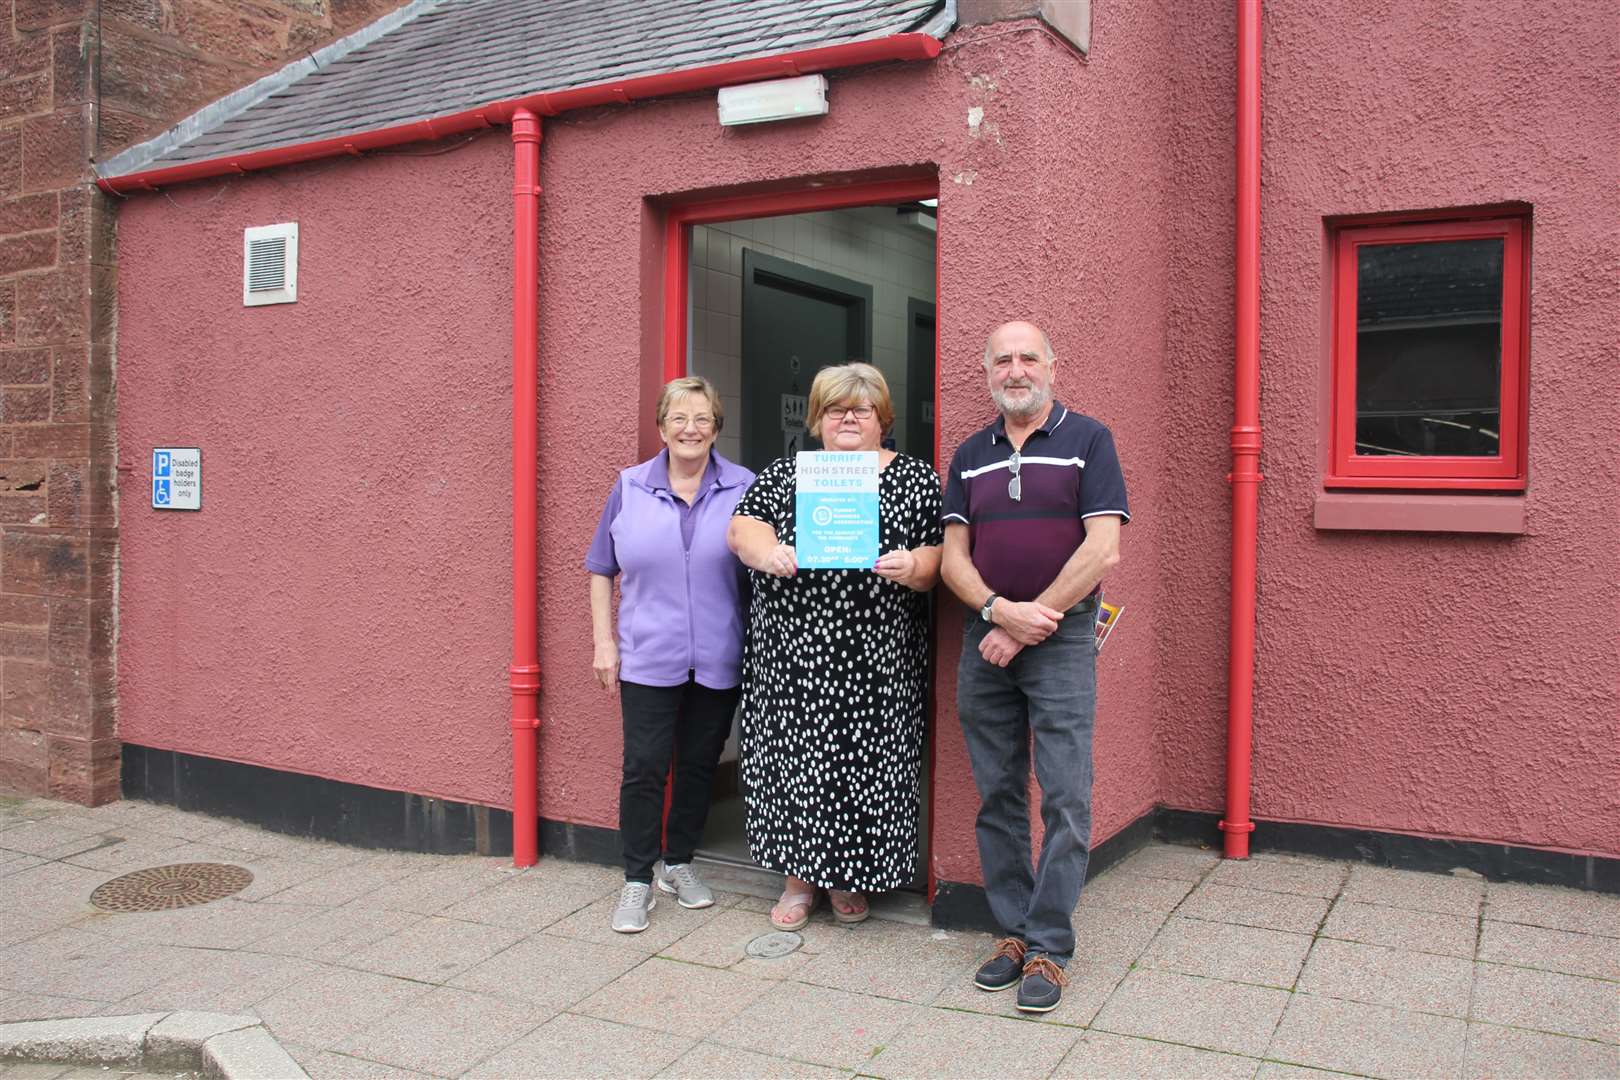 Excited for the toilets to open to the public in September were Turriff Business Association's Rose Logan and Marj Chalmers and volunteer Ian Garden. Picture: Kirsty Brown